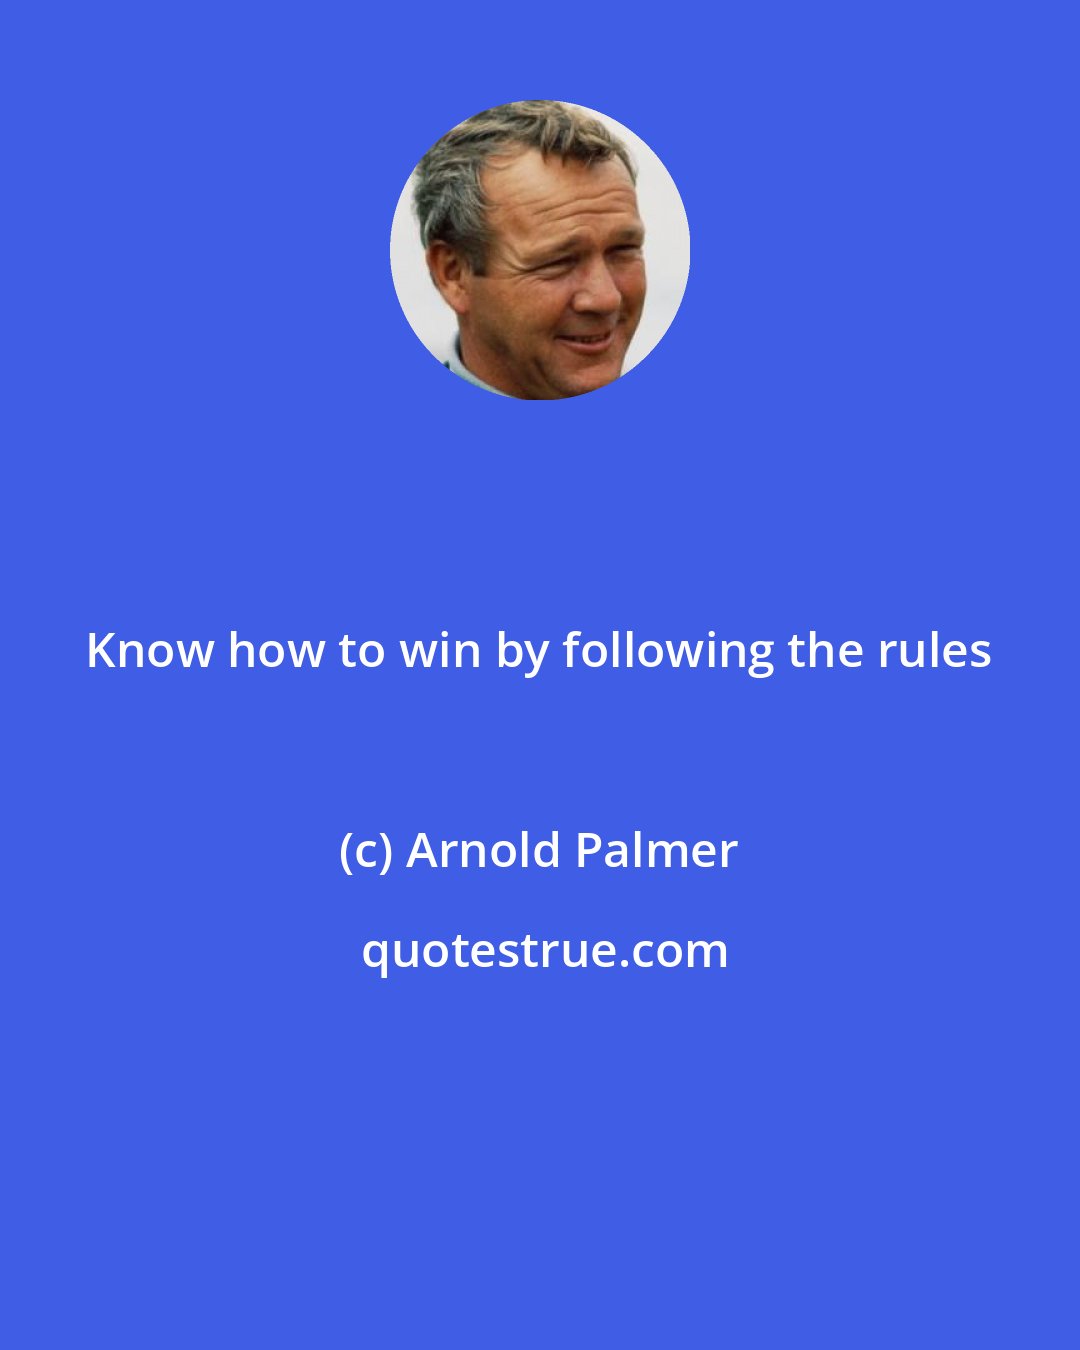 Arnold Palmer: Know how to win by following the rules